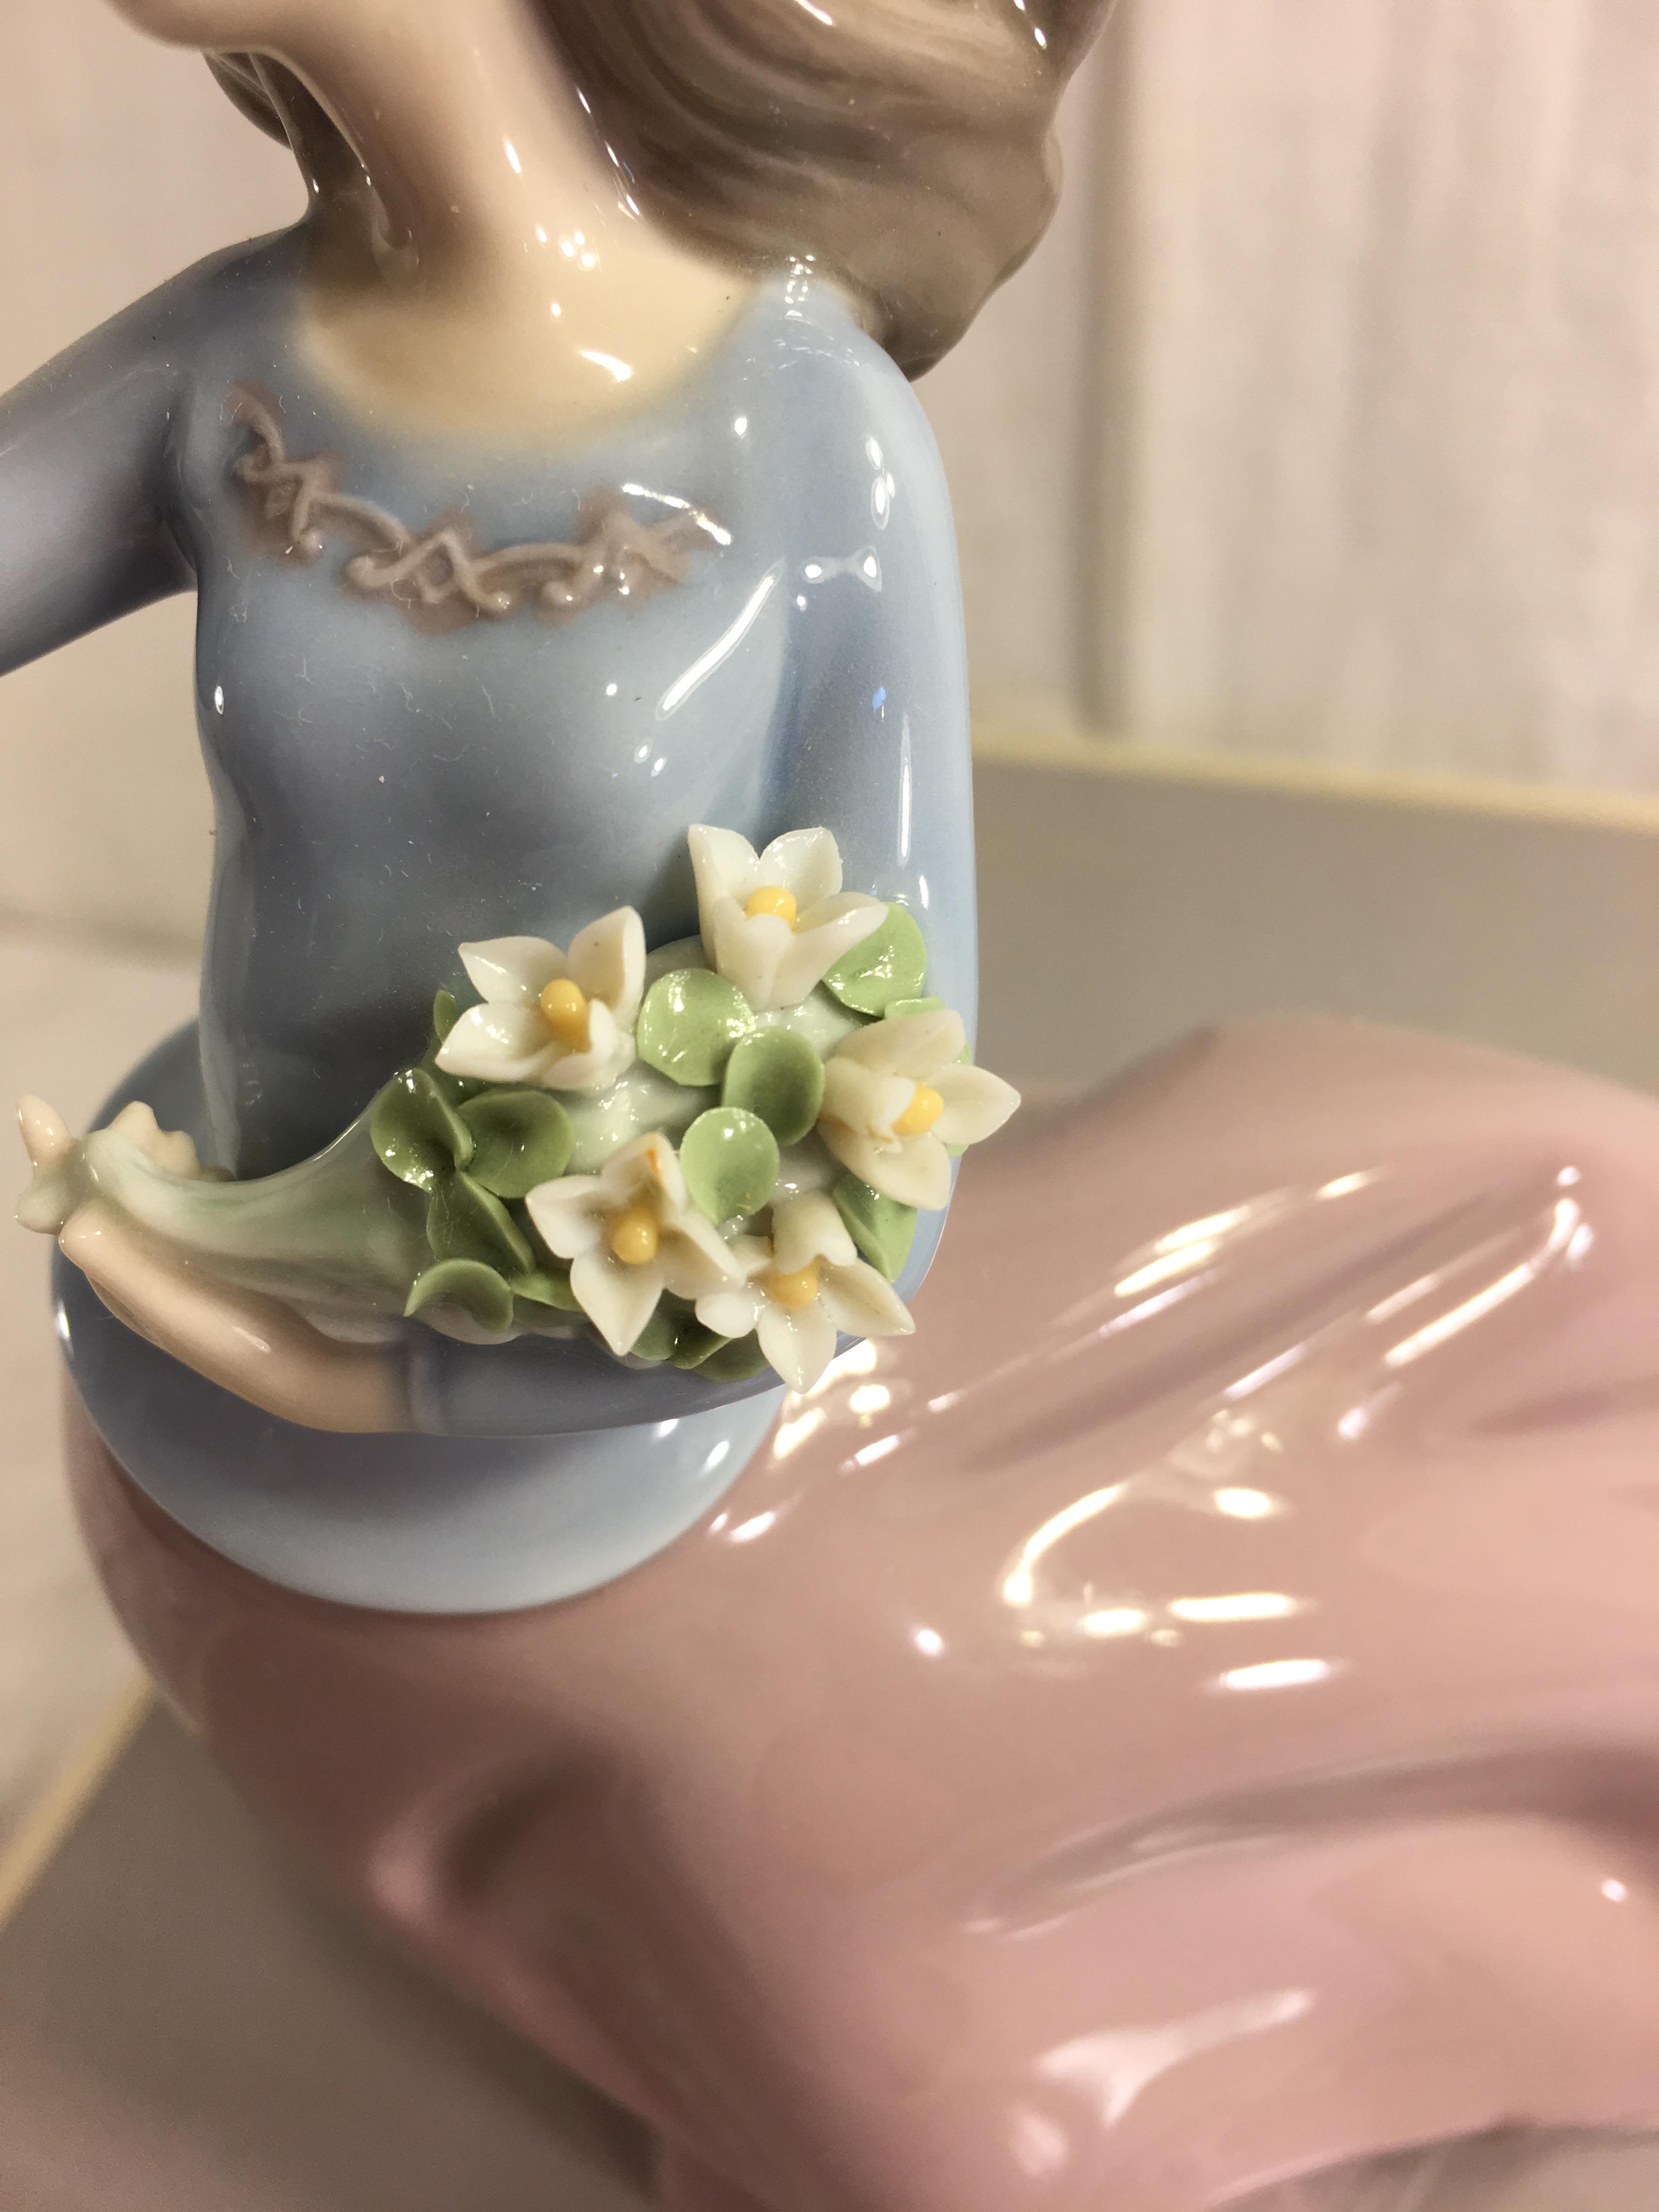 Collector Retired Lladro 5590 "Spring Breeze" Figurine Box Size:12.5x7.5" by 5.7/8"Tall Box